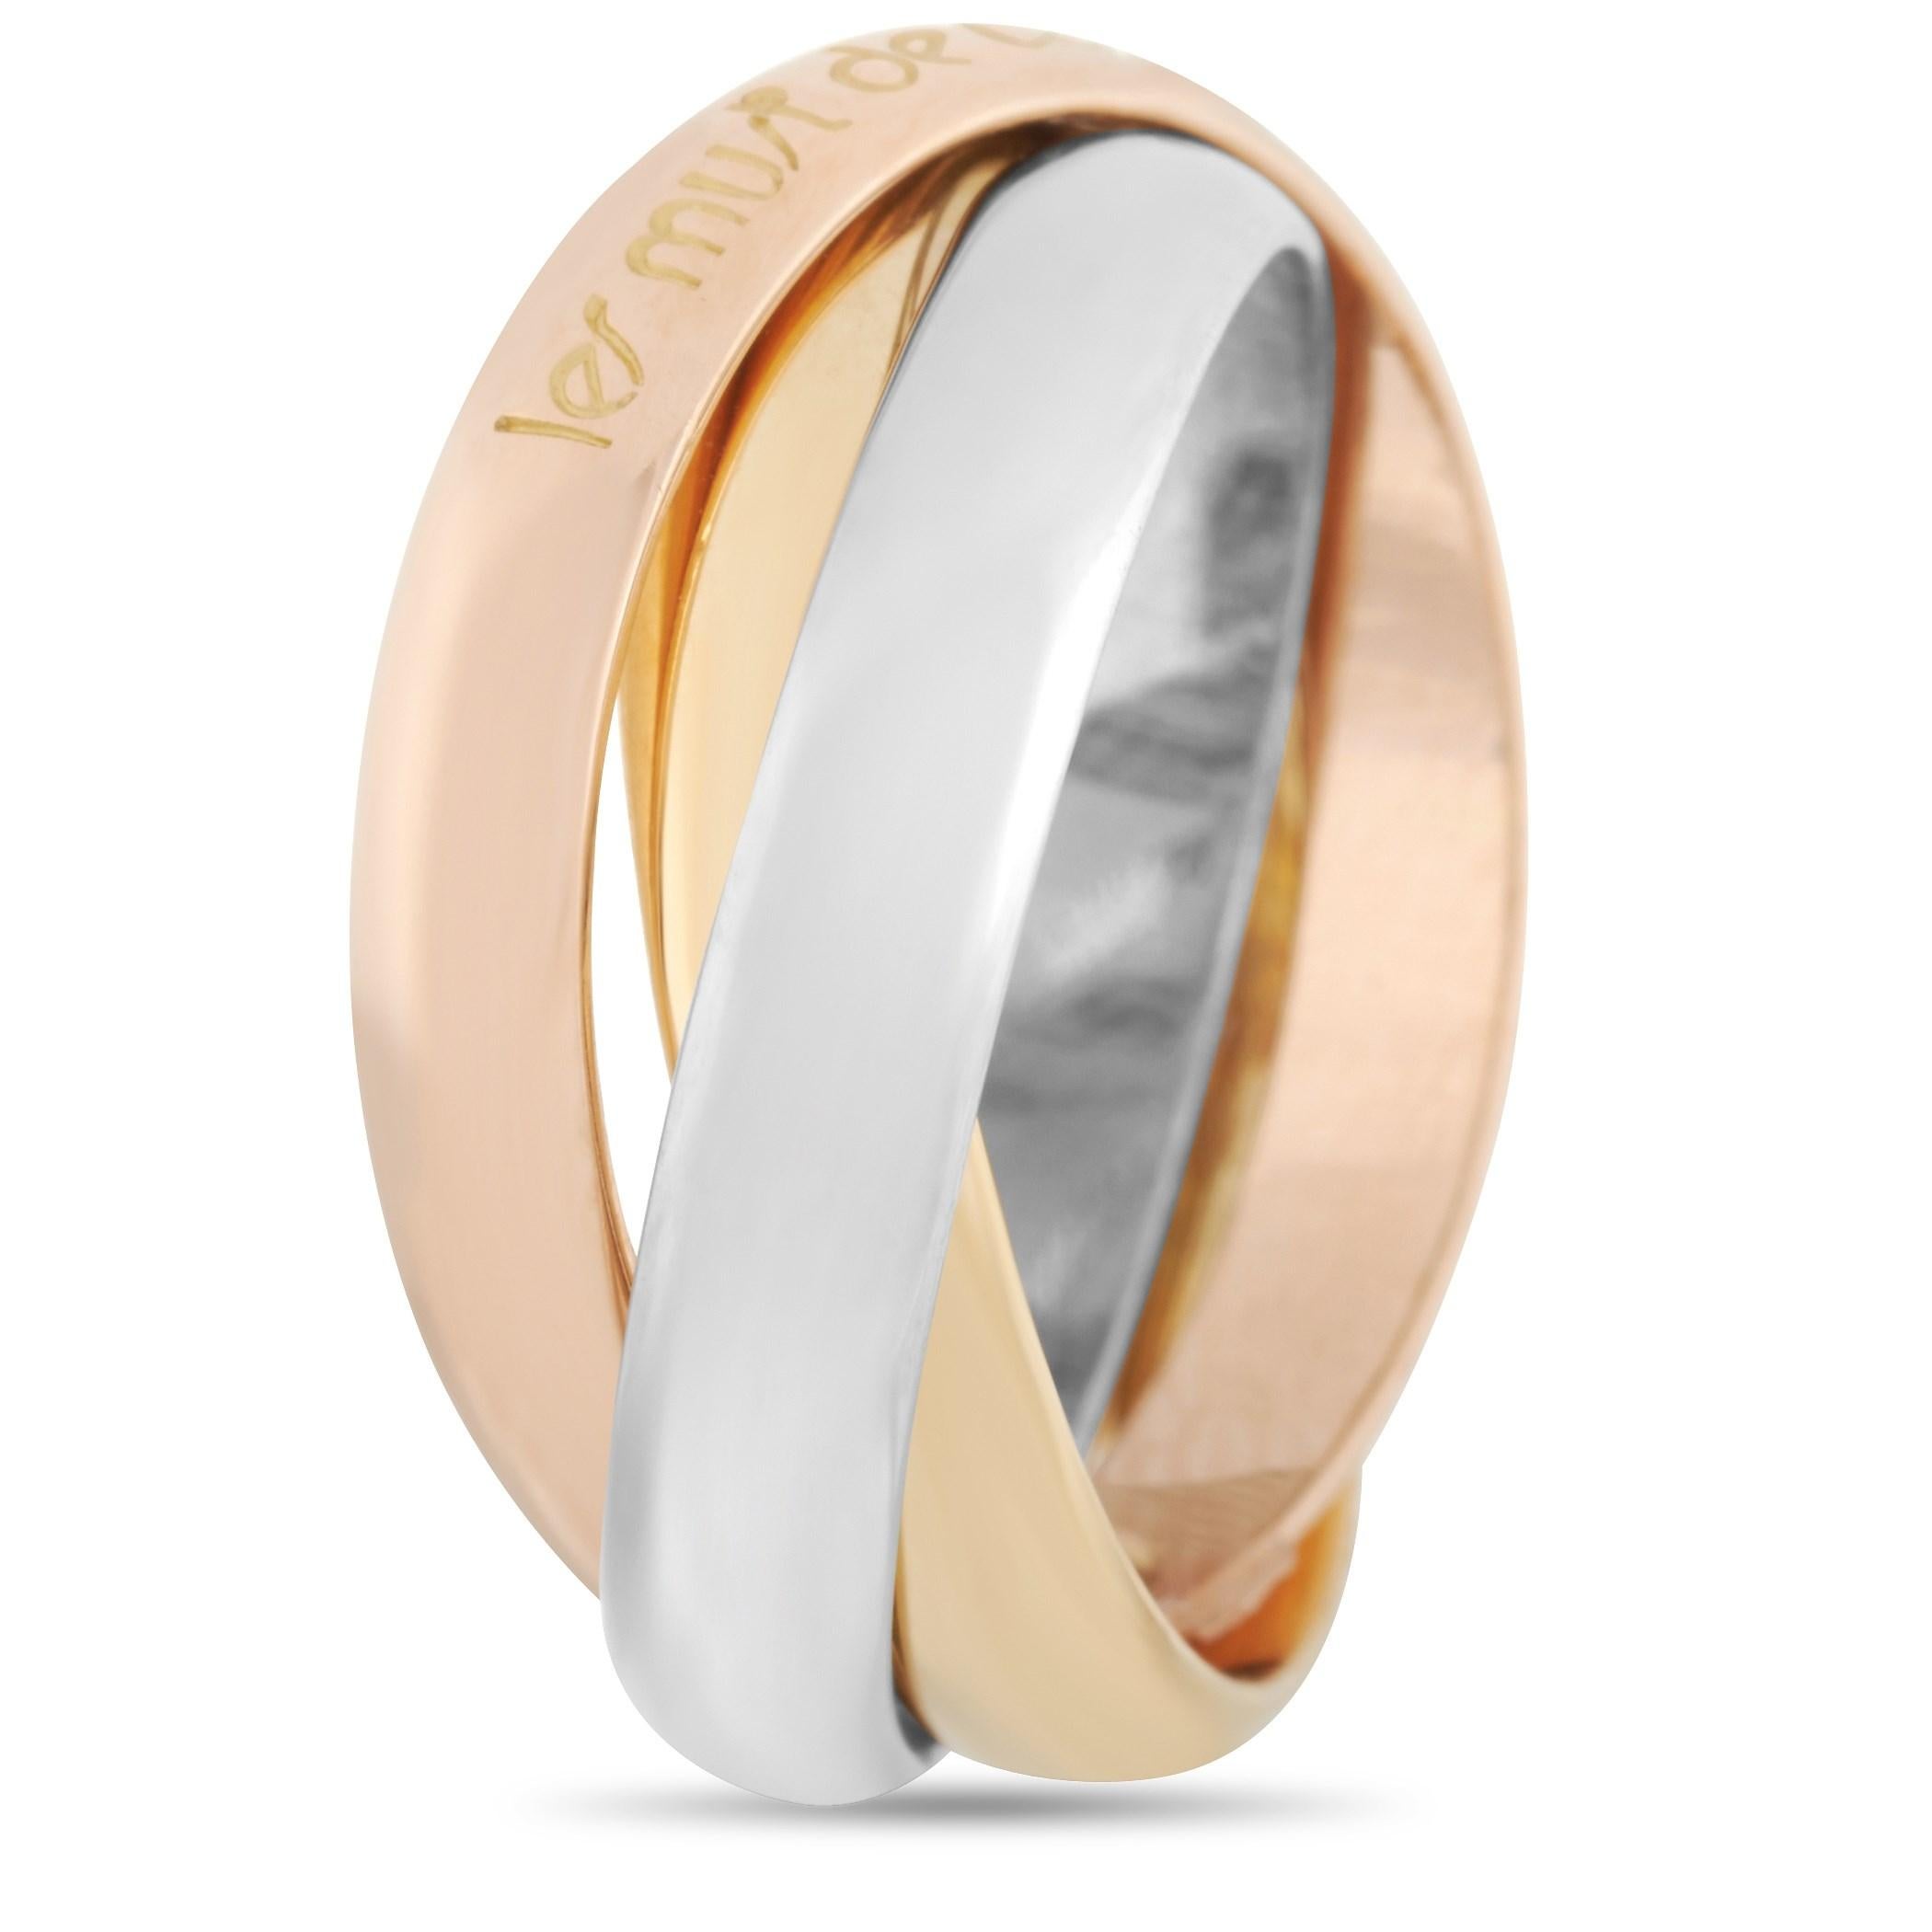 This Cartier “Trinity” ring is crafted with 18K yellow, rose and white gold and weighs 7.6 grams. The ring, circa 1989, boasts a band thickness of 8 mm and features an engraved text on the ring 